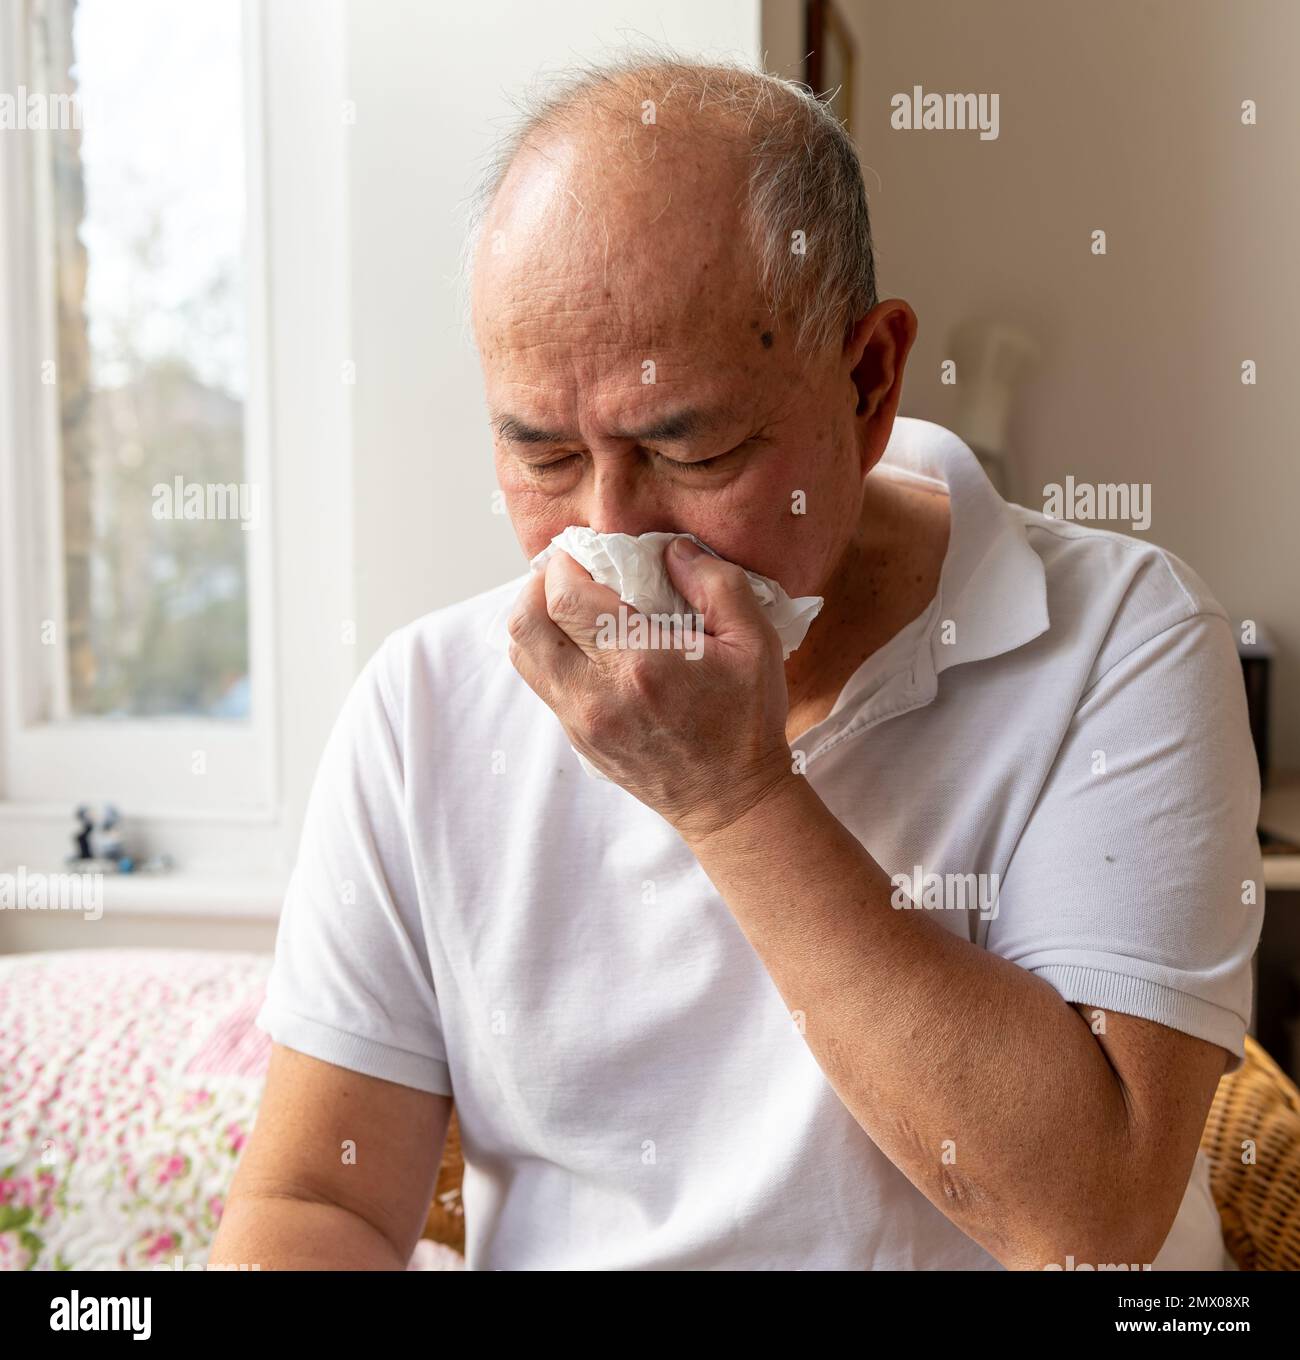 A elderly man sneezing into paper tissues and blowing his nose suffering the symptoms of Winter cold and flu. Stock Photo